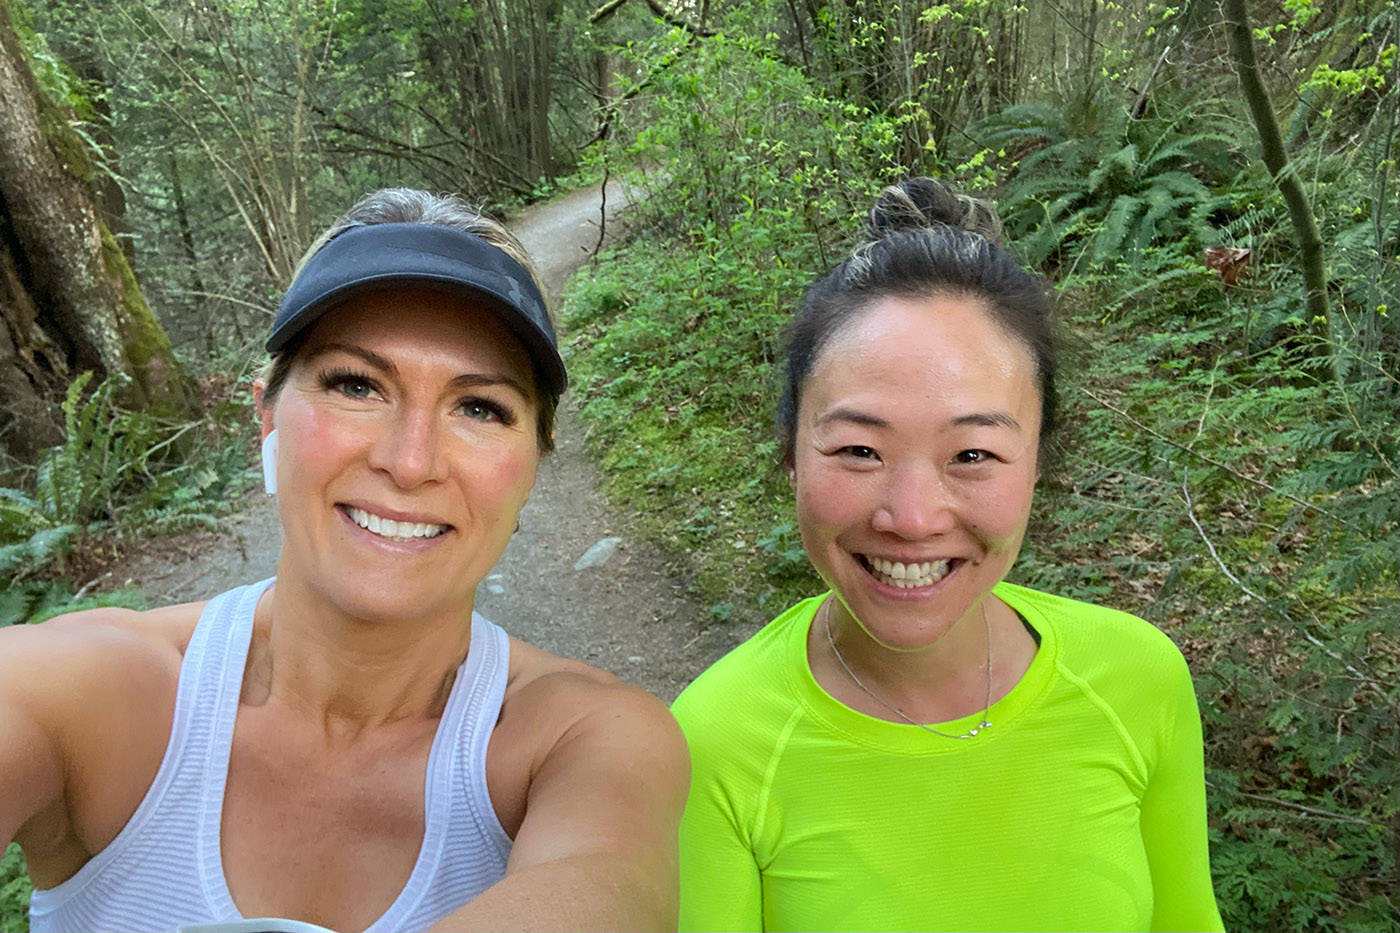 April Migneault of Maple Ridge, seen here with her running friend Hannah Baerg, has run every day in April (and also increased the distance of each run by one kilometre each day) for a total of 465 kilometres in 30 days. Its how she chose to raise money for her friend, Dave Corke of Chilliwack, who has leukemia. (Facebook/April Migneault)